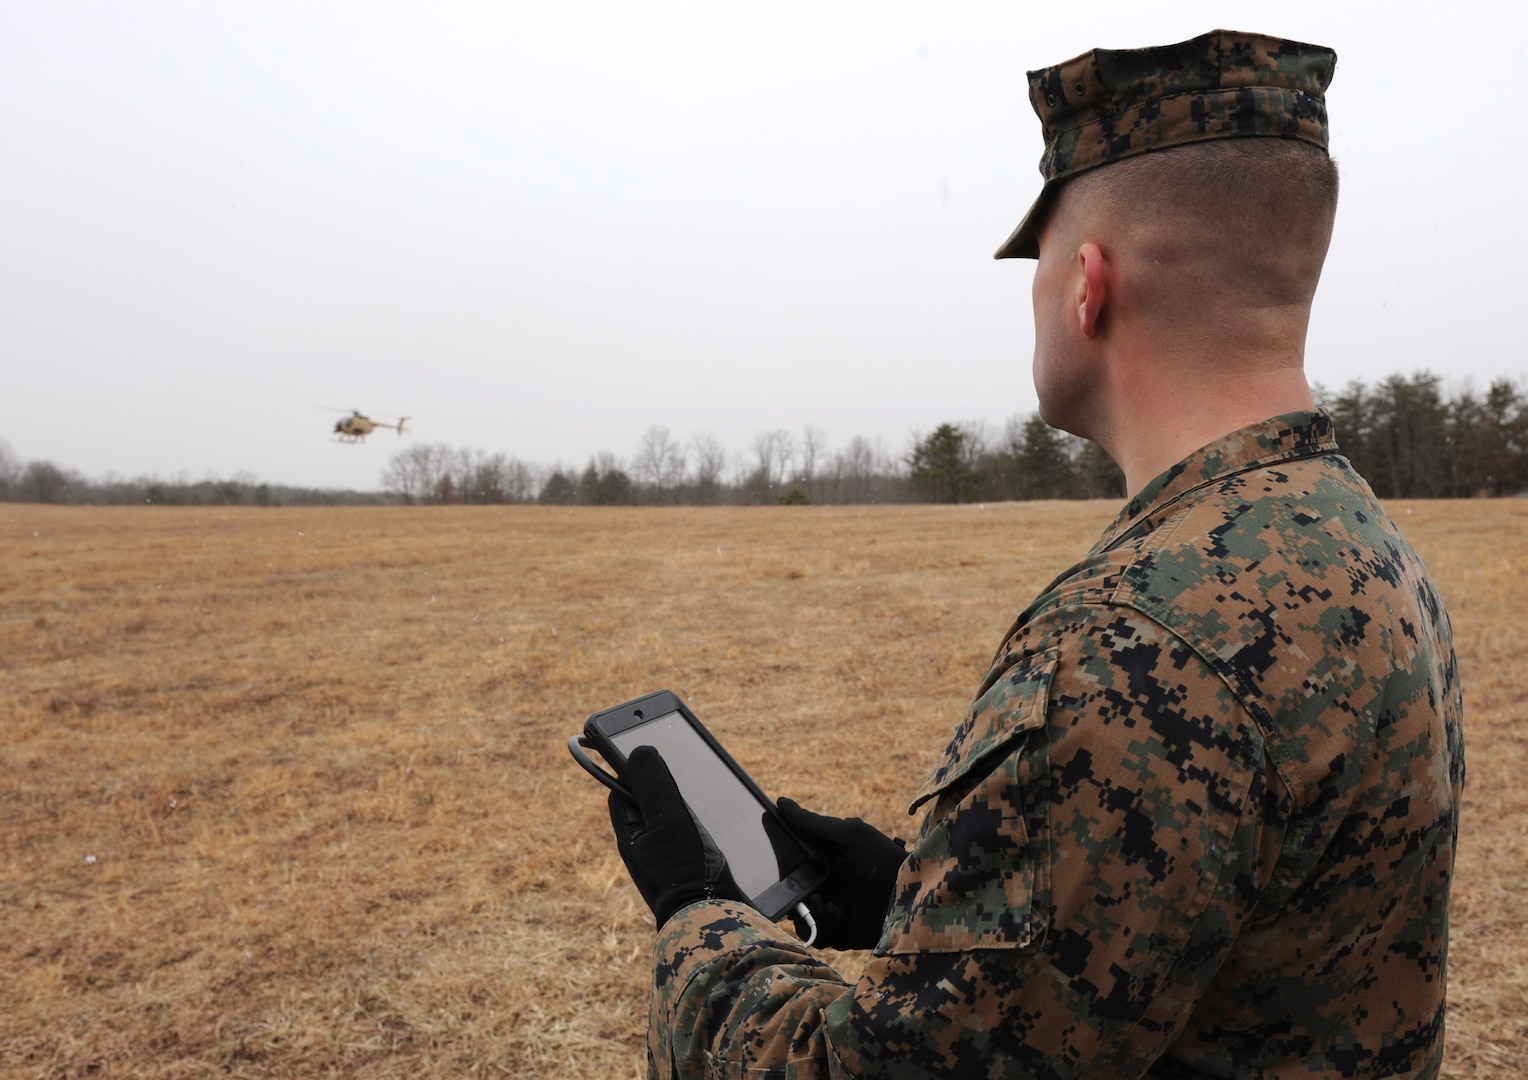 Seaman uses handheld tablet to request resupply during Office of Naval Research demonstration of Autonomous Aerial Cargo/Utility System, giving
capability to helicopters for unmanned flight, Quantico, Virginia, February 25, 2014 (U.S. Navy/John F. Williams)